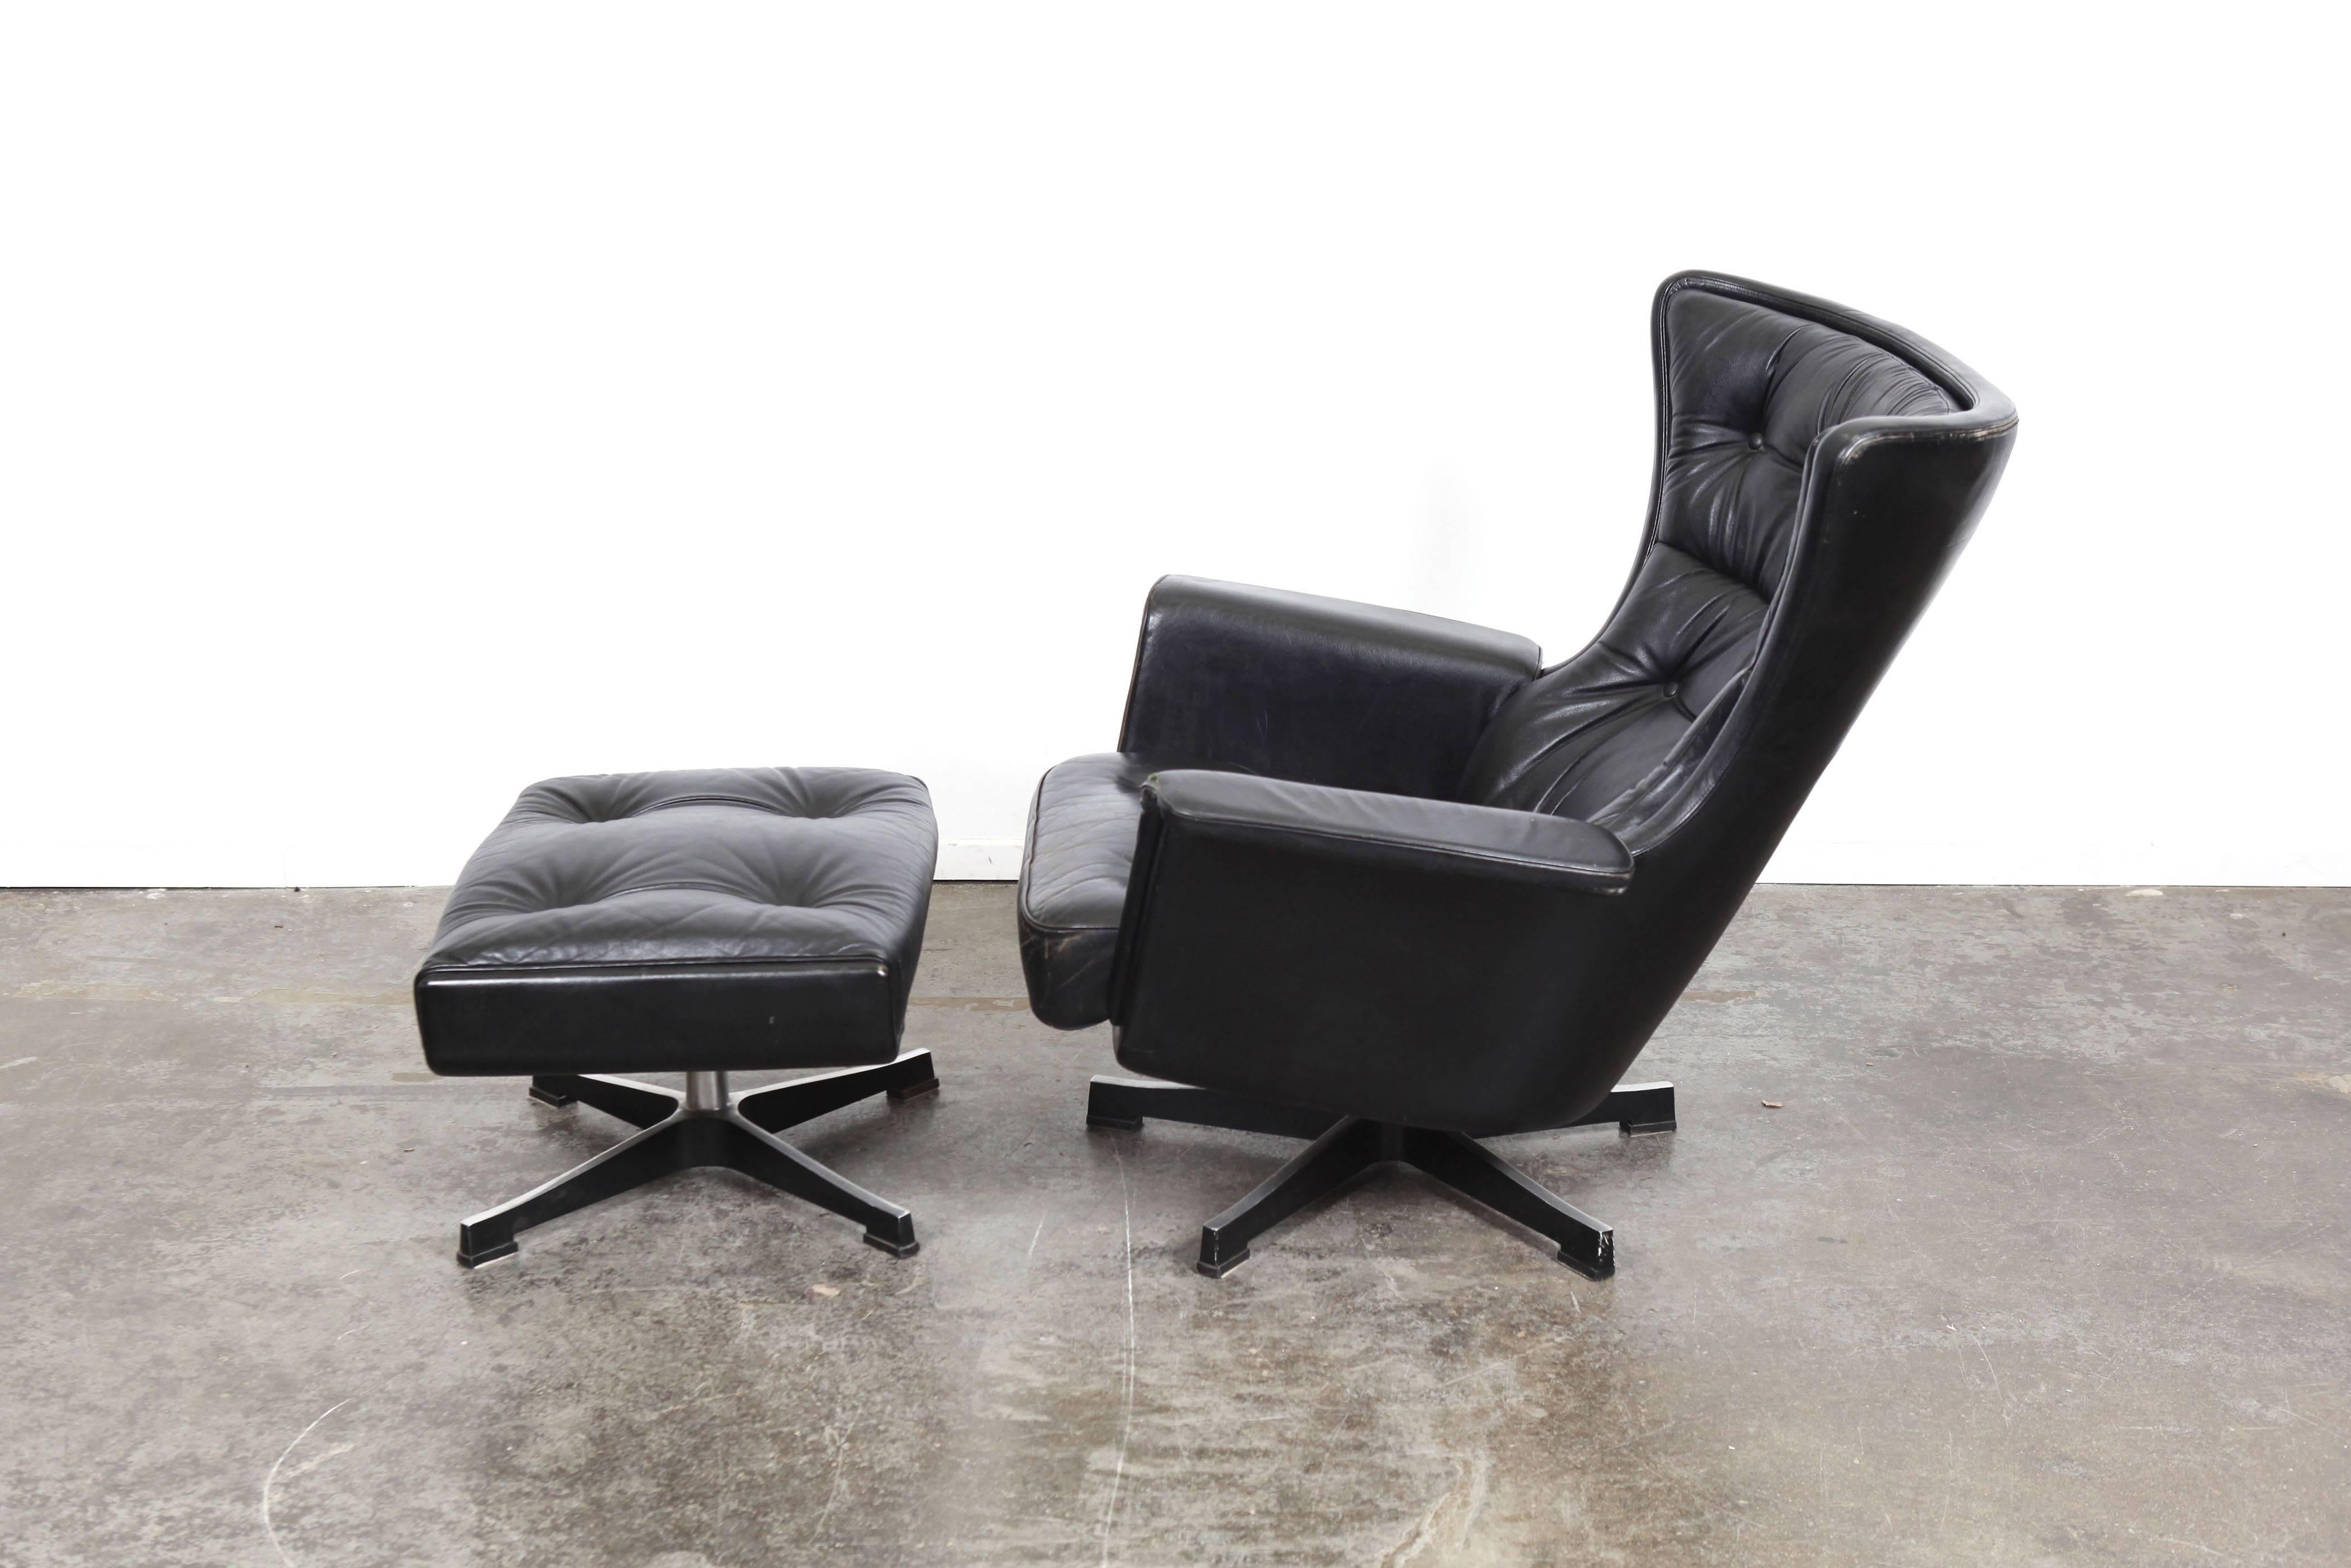 Swedish Mid-Century Modern vintage black leather swivel lounge chair with ottoman, designed by Karl Erik Ekselius for JOC Mobler. Both pieces are in original black leather.